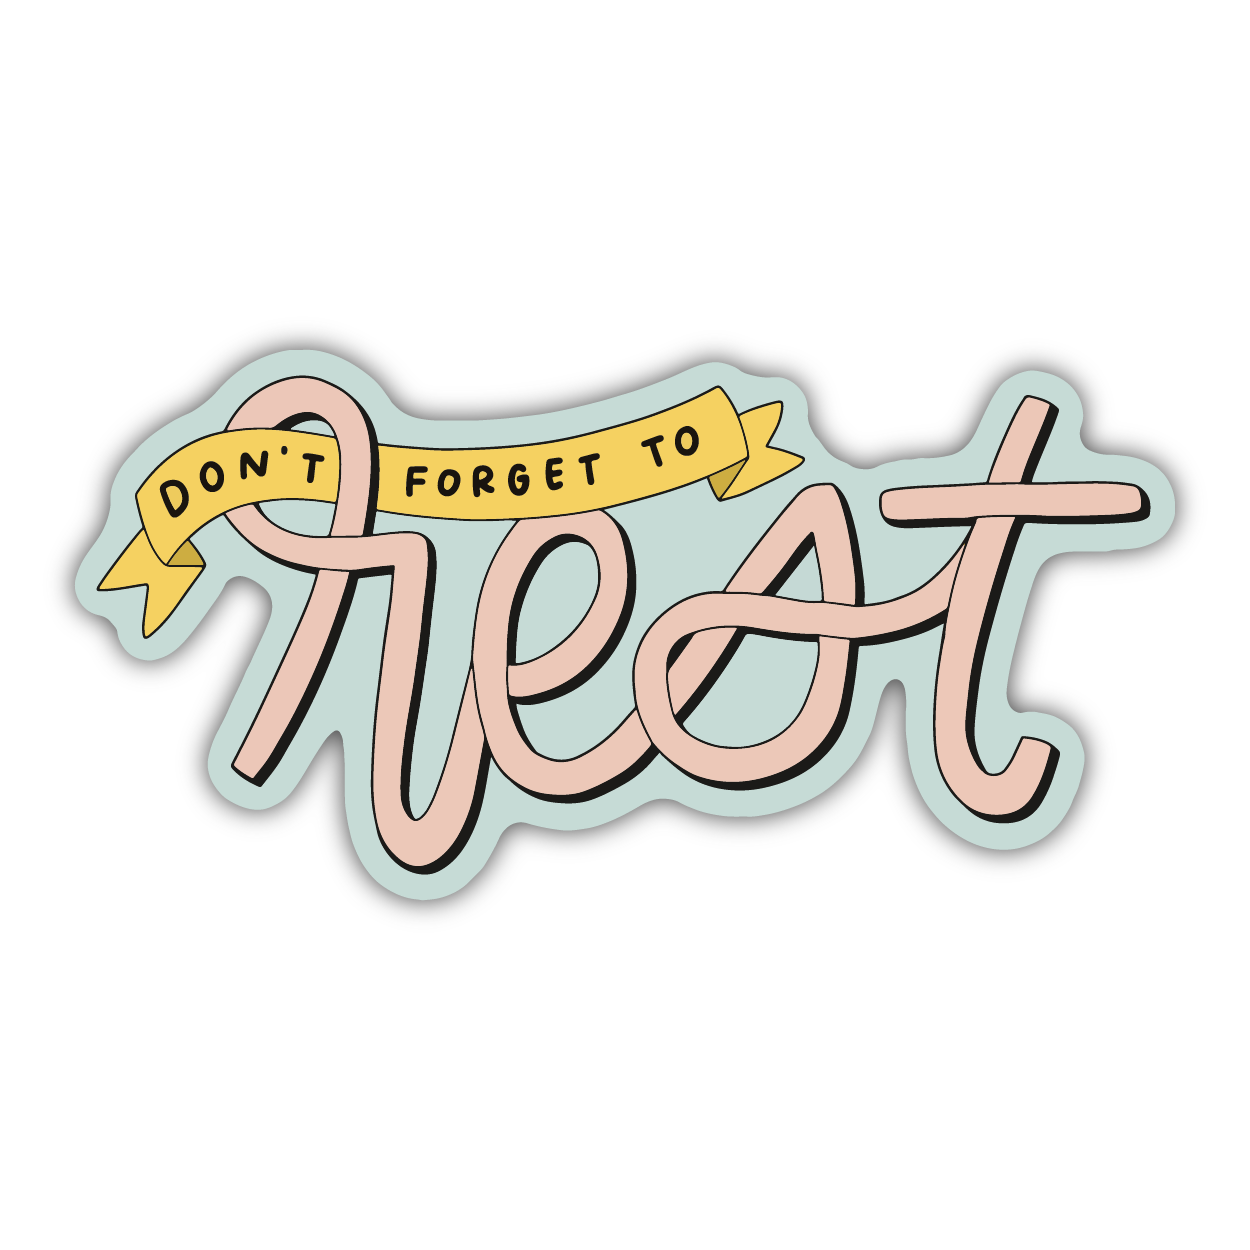 Don't Forget to Rest Sticker